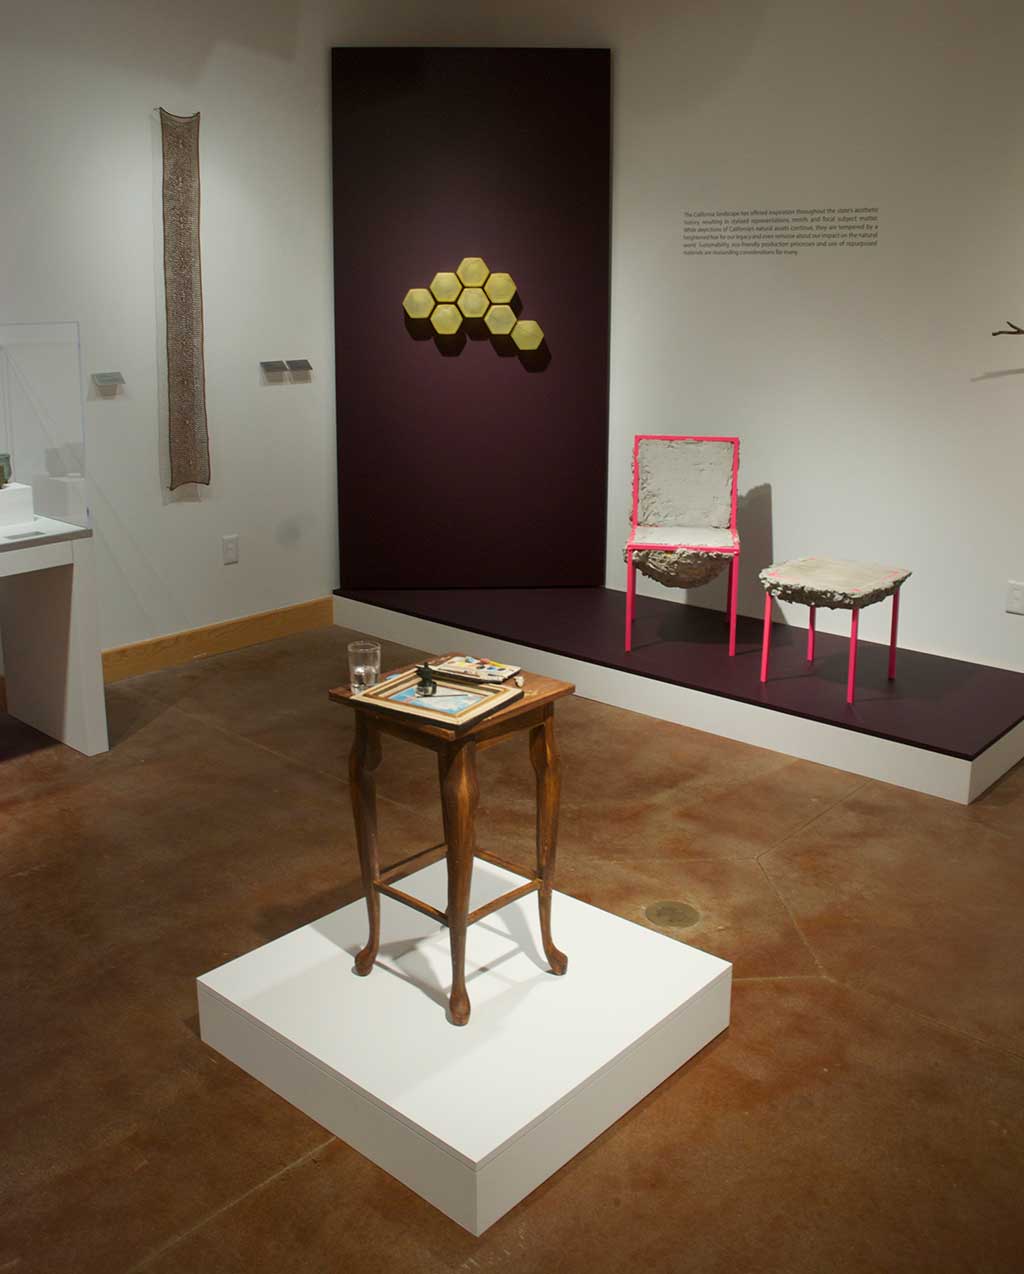 (l-r) Jennifer Reifsneider, For A Sphere With Nine Poles, 2011; Pamina Traylor, Oakland Beeways, 2011; Adrian Clutario, Labejia Series - Chairs, 2012; Richard Shaw, Still Life with Two Landscapes, 2013 (front)